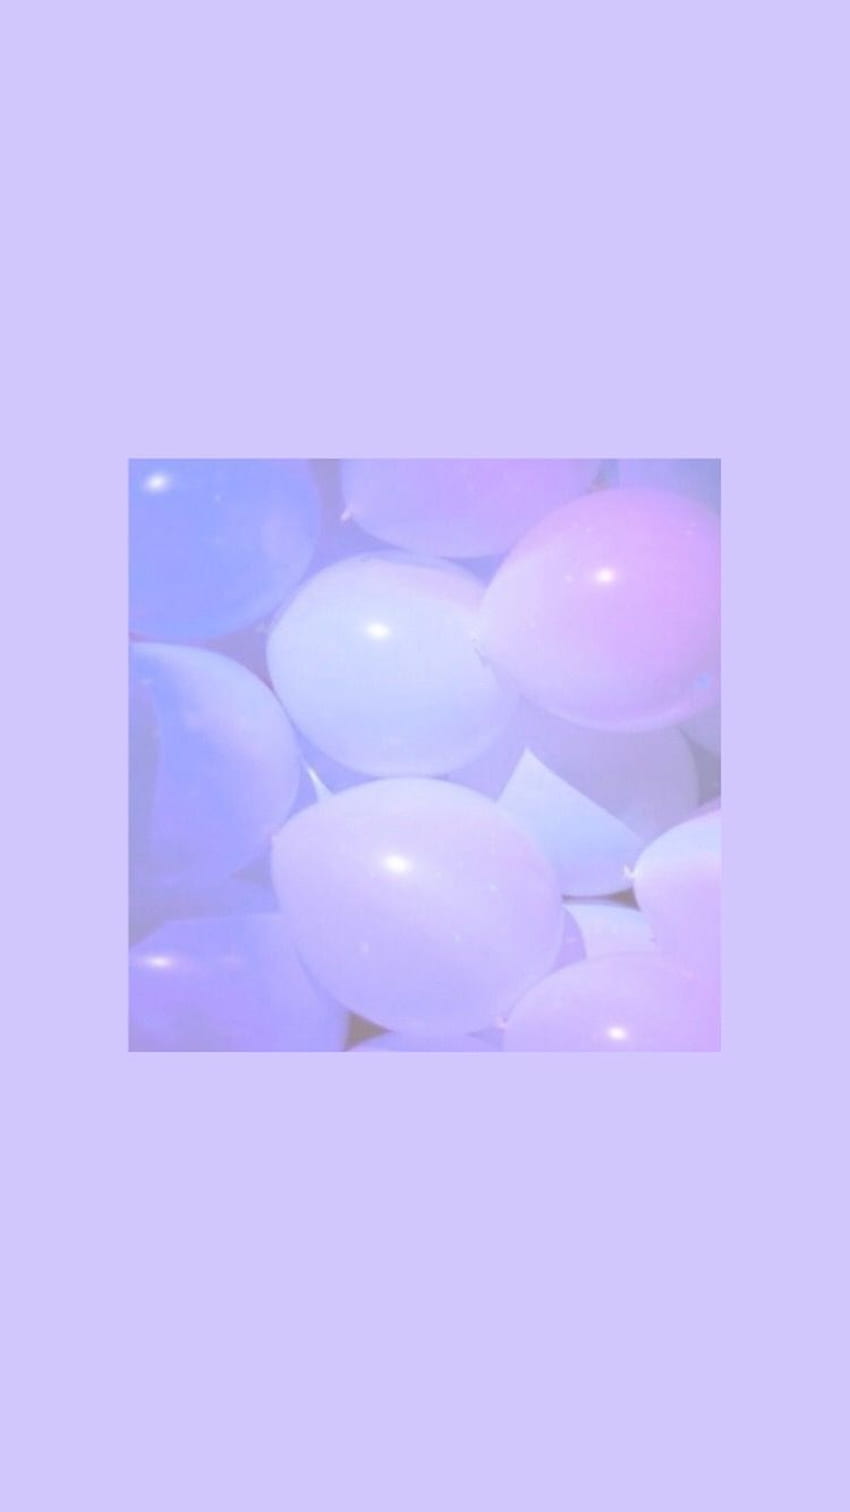 A purple background with a picture of white balloons - Balloons